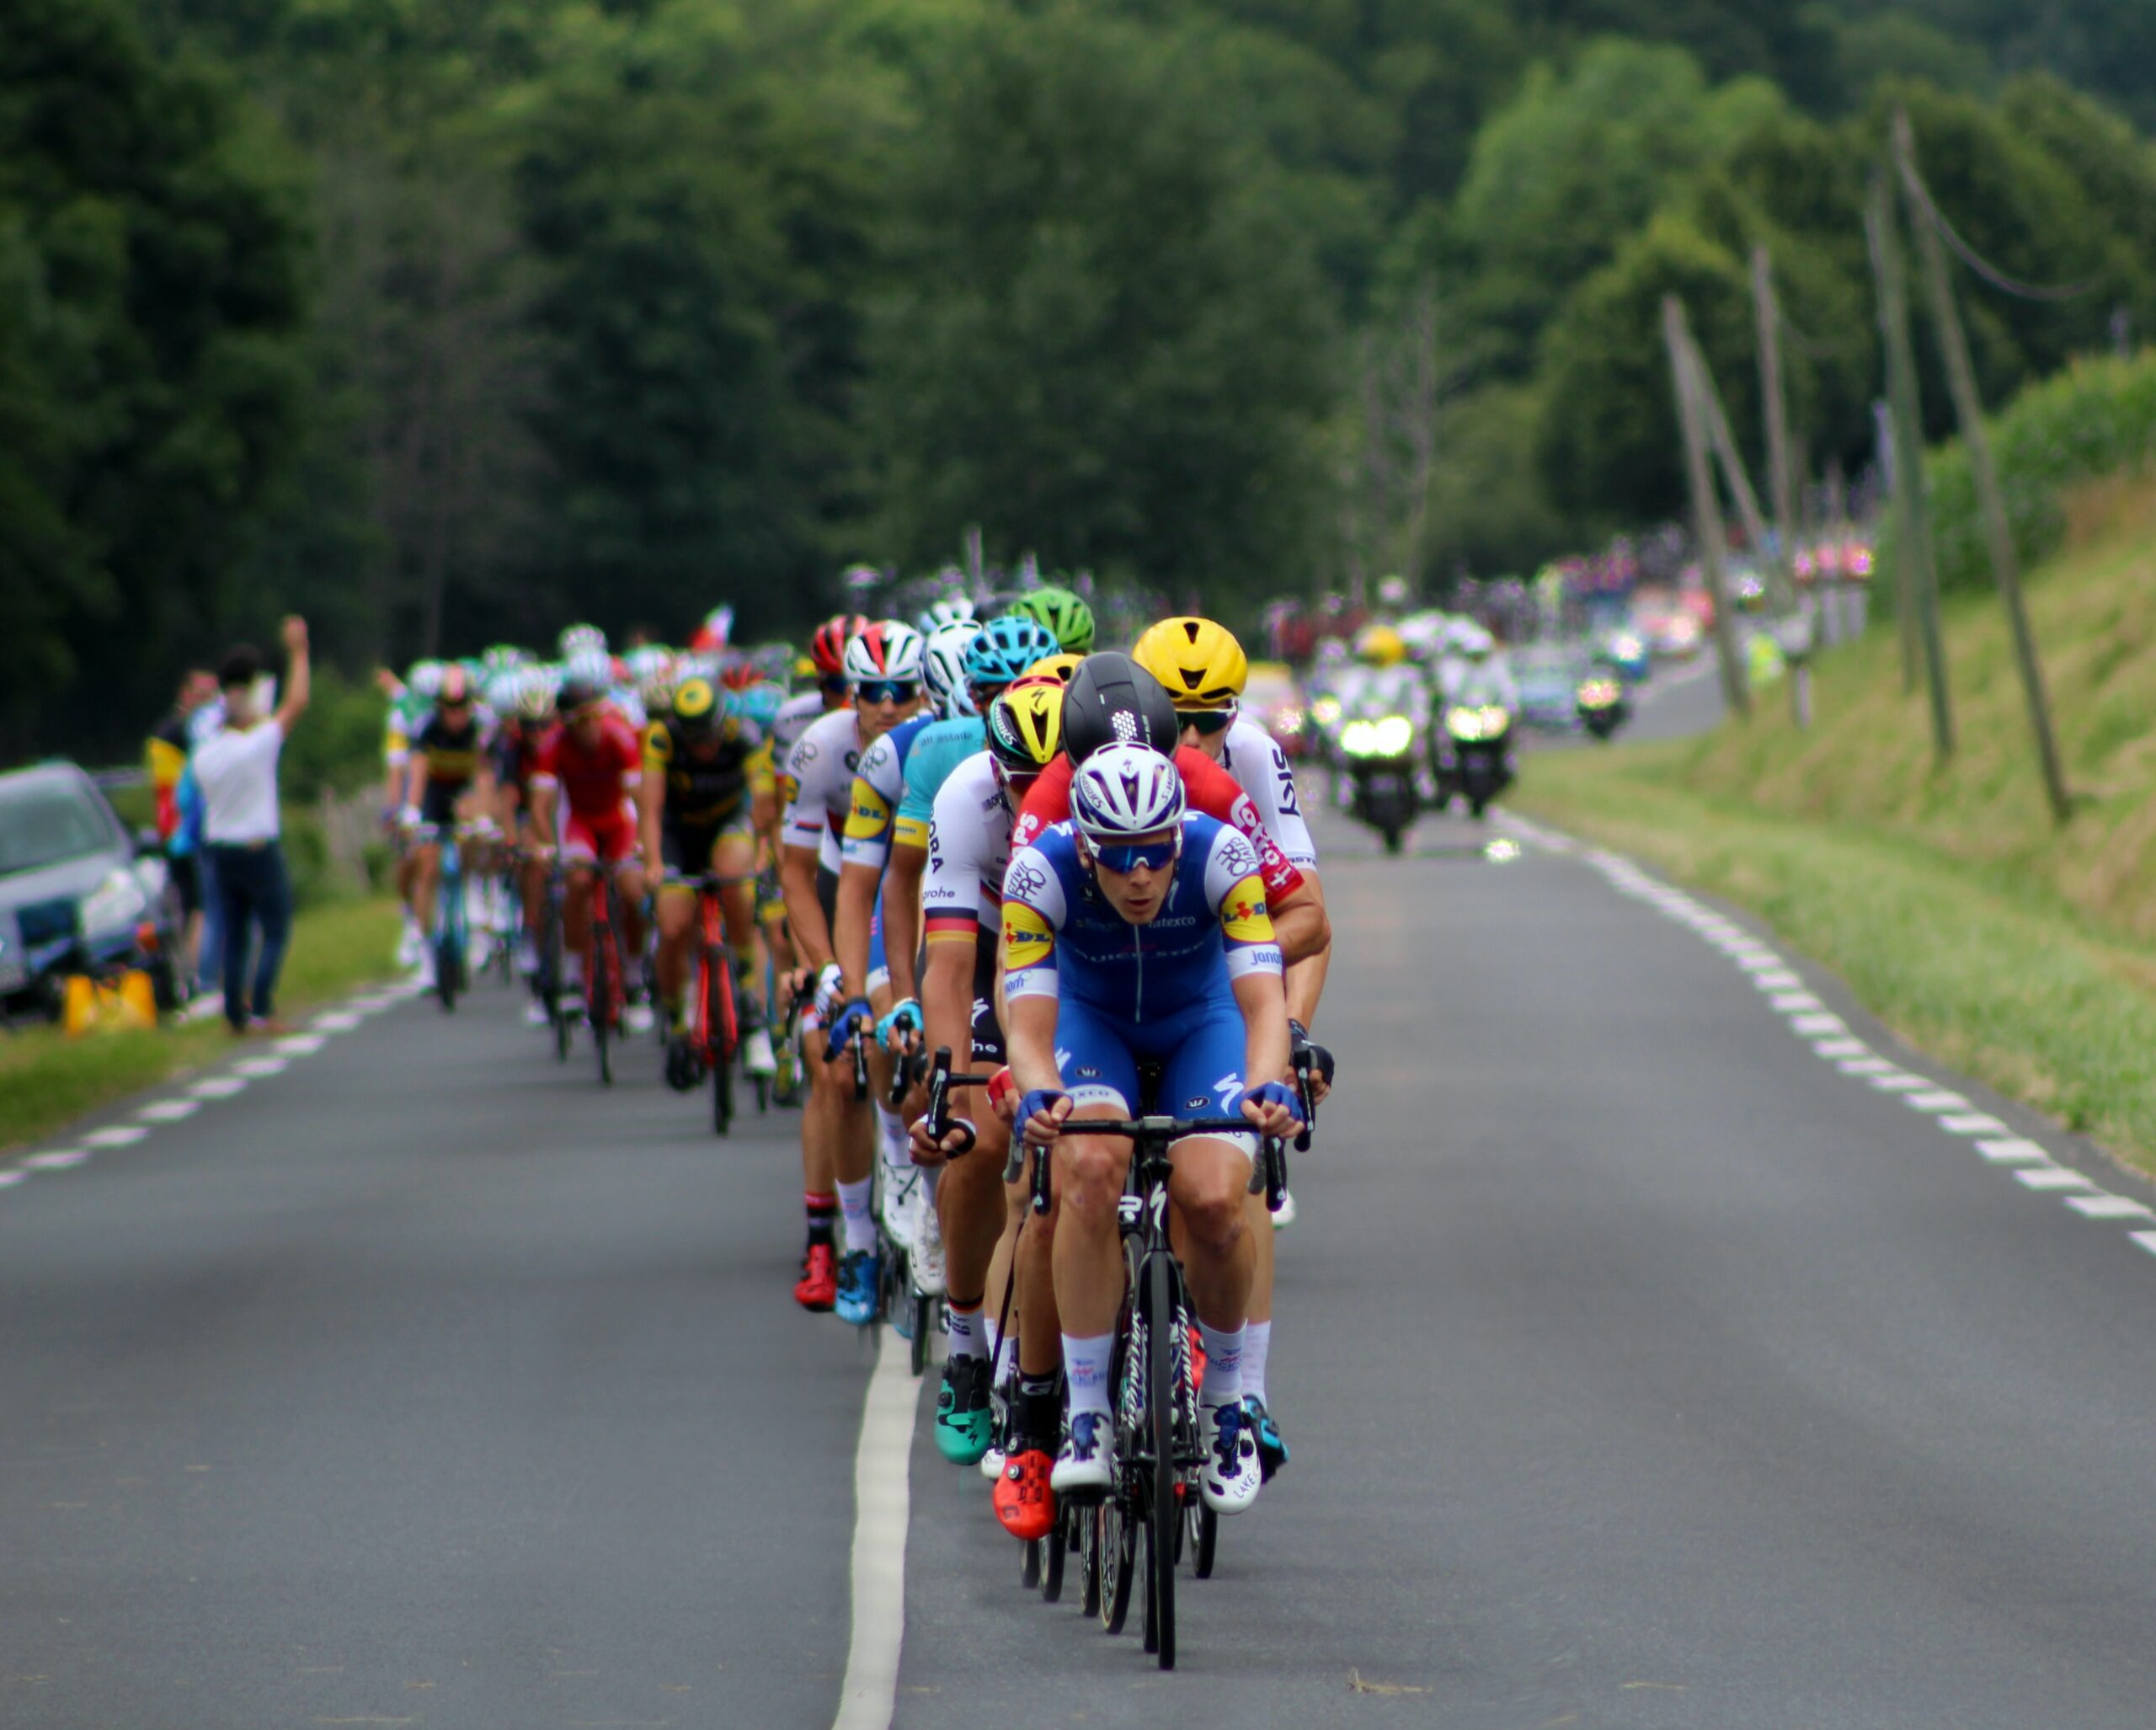 A group of cyclists taking place in a road race in the countryside